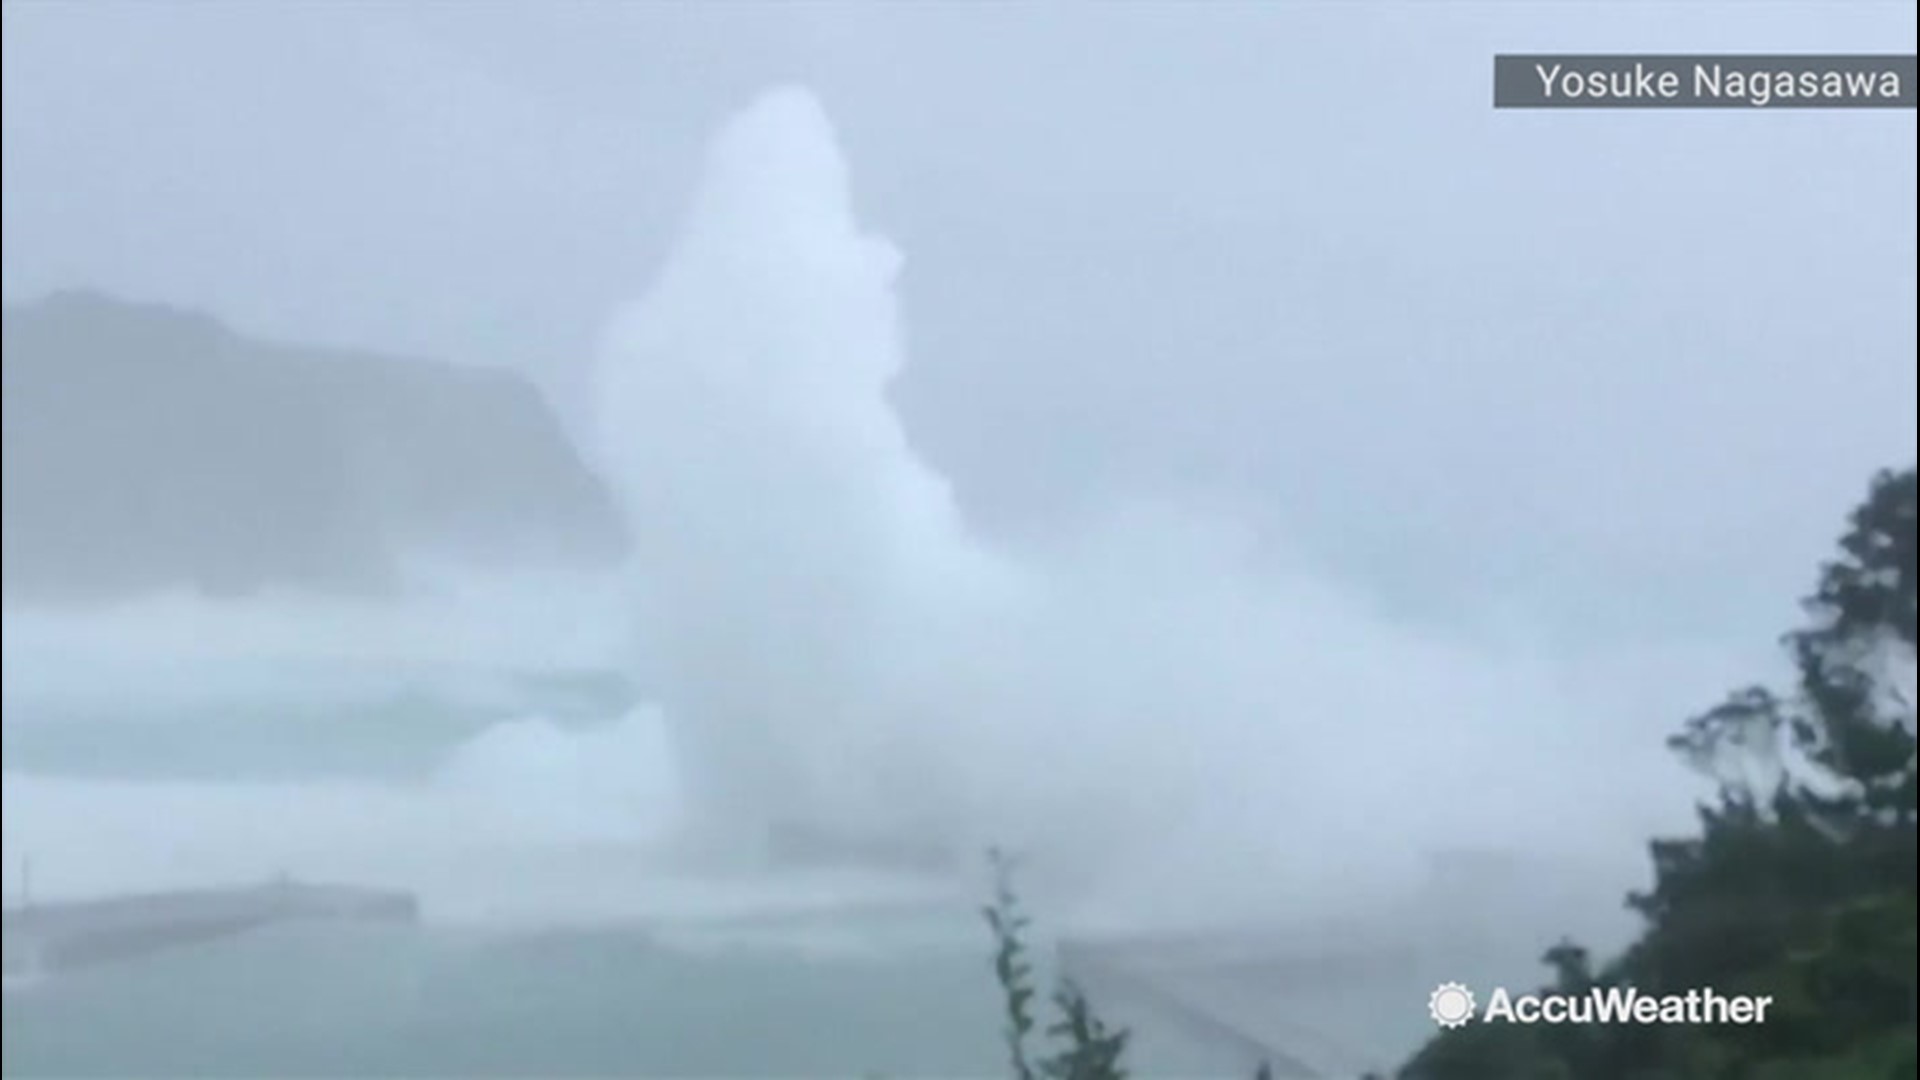 As Typhoon Hagibis passed over the Kozu Island, Japan, on Oct. 12, an eyewitness filmed massive waves stirred up by strong winds.